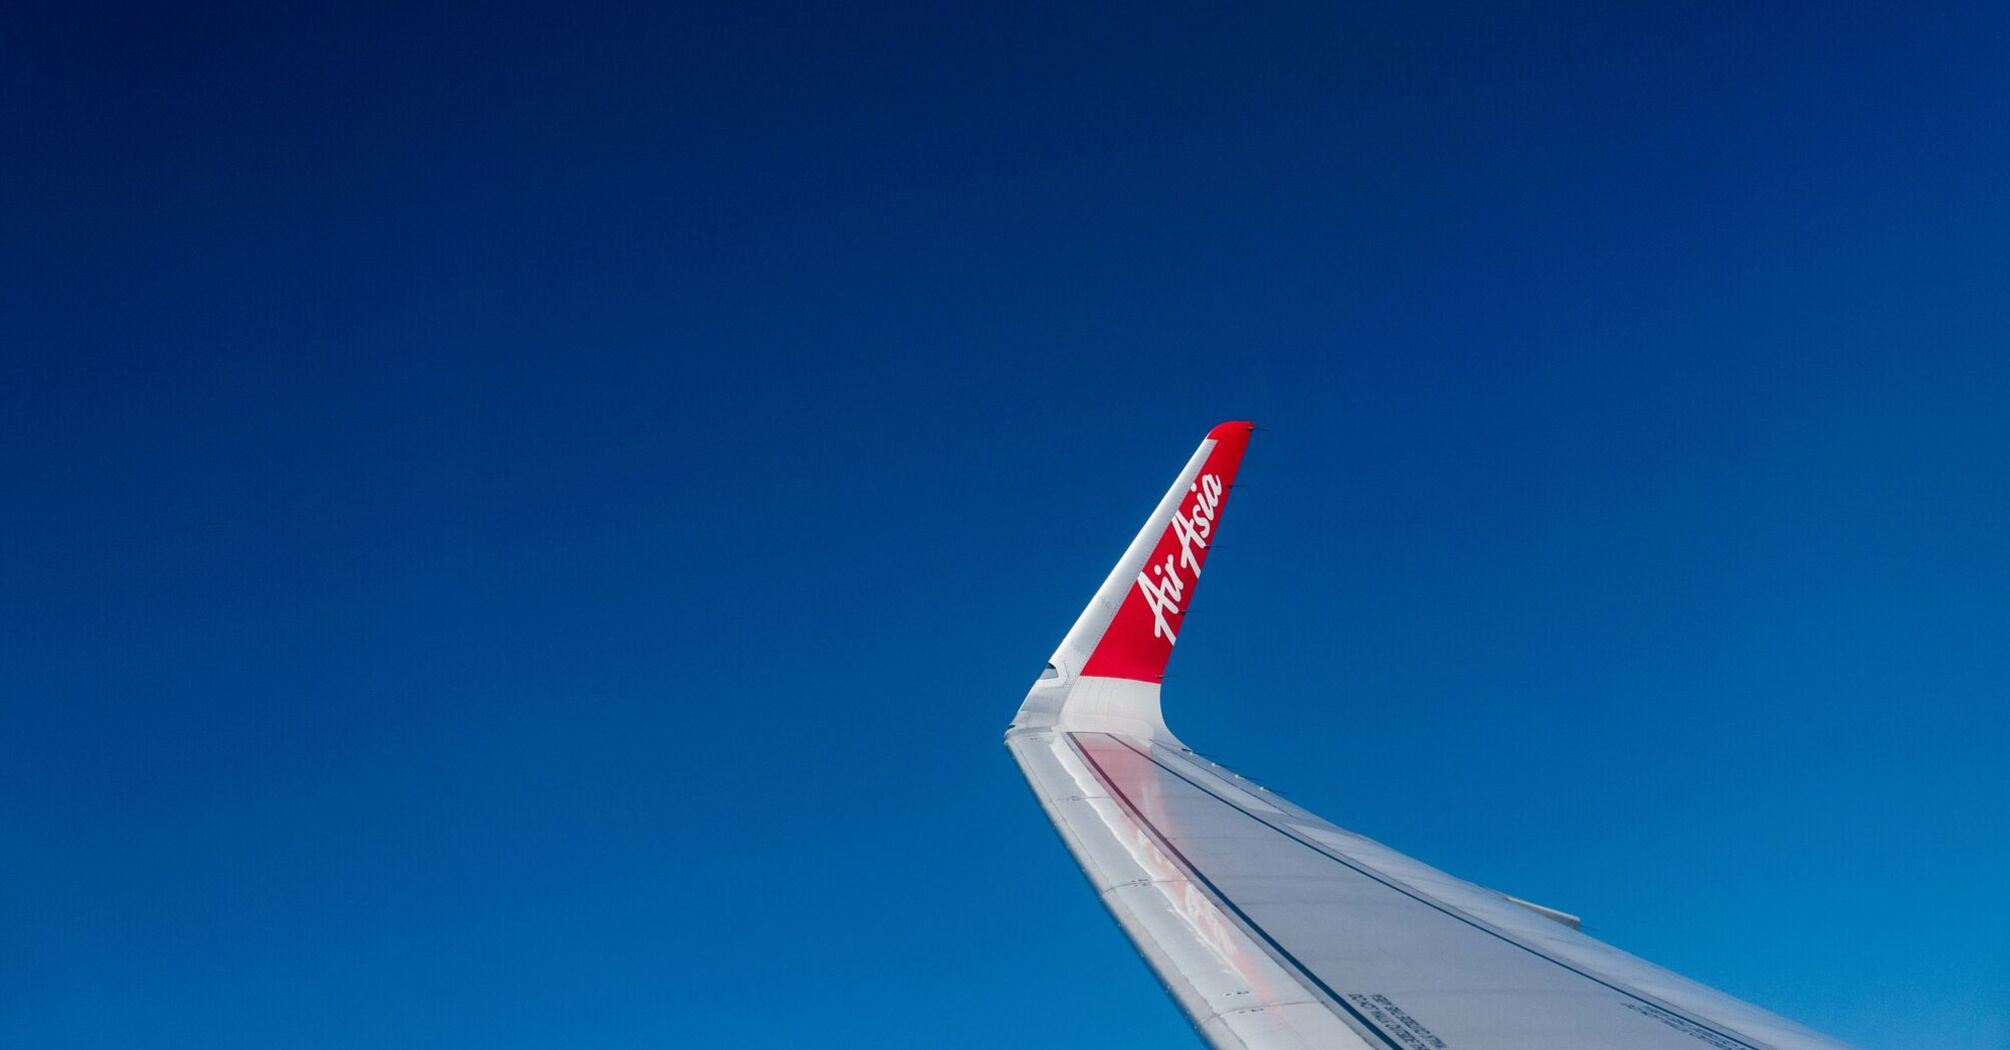 The wingtip of an AirAsia airplane with its distinctive red logo against a clear blue sky